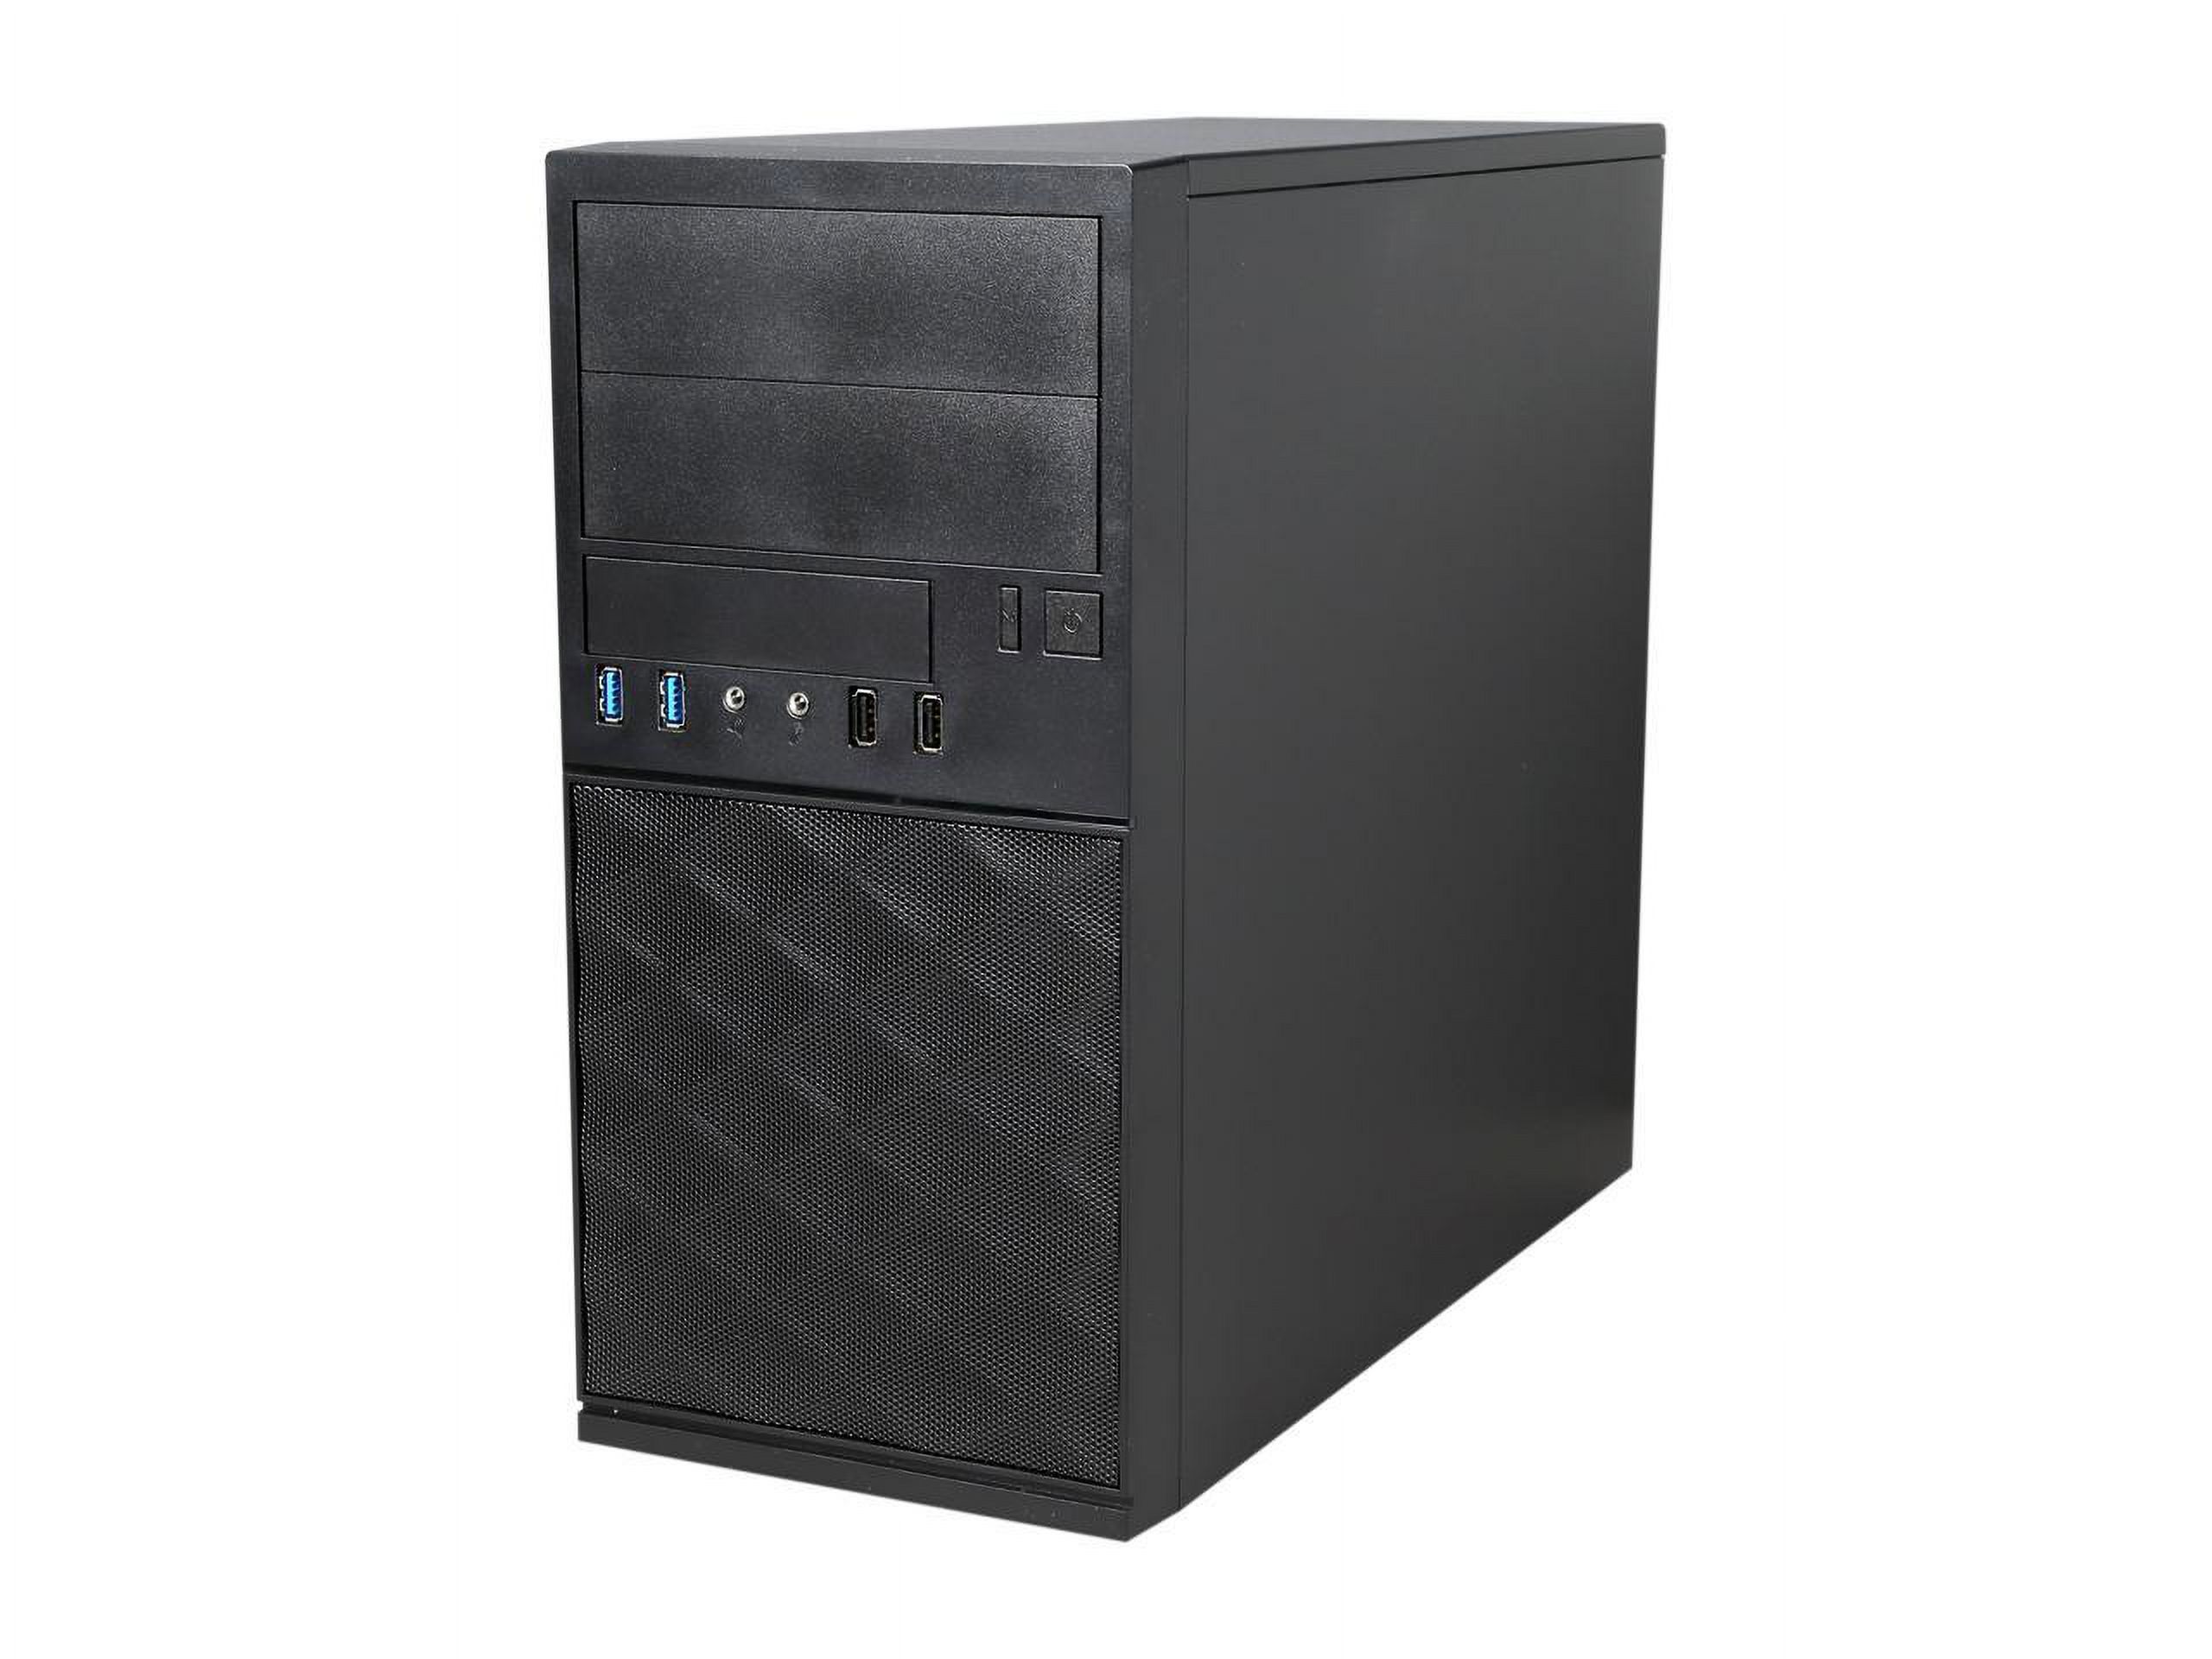 IN WIN EFS052.CH450TB3 Black Mini Tower Computer Case MicroATX 12V Form Factor, PSII Size Power Supply - image 3 of 9